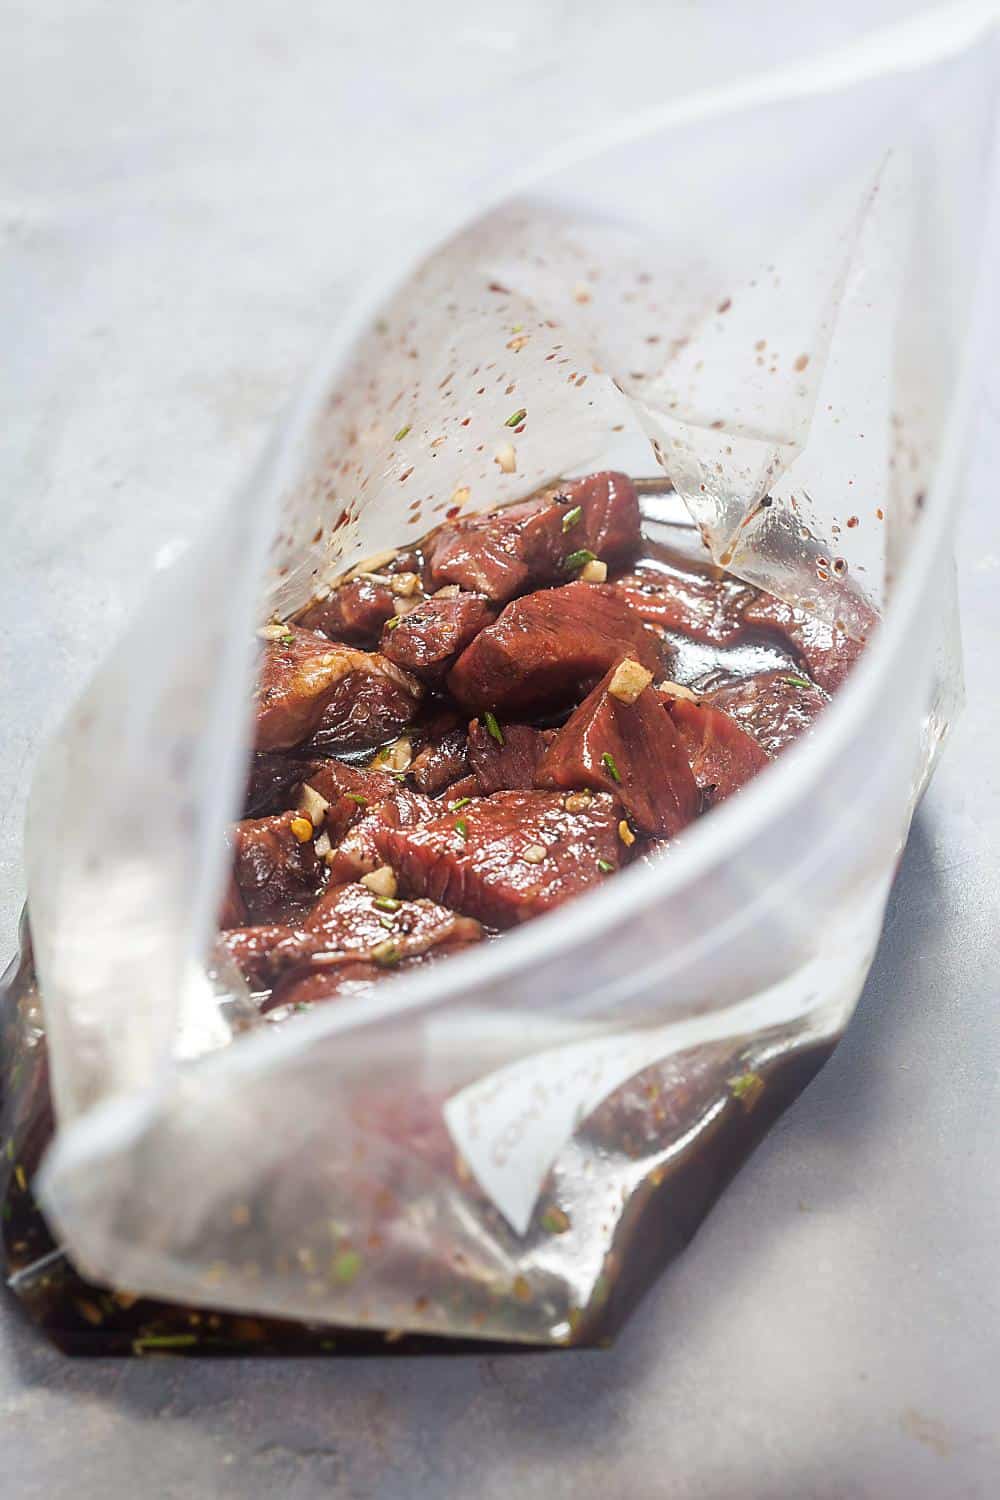 steak tips in a bag with marinade